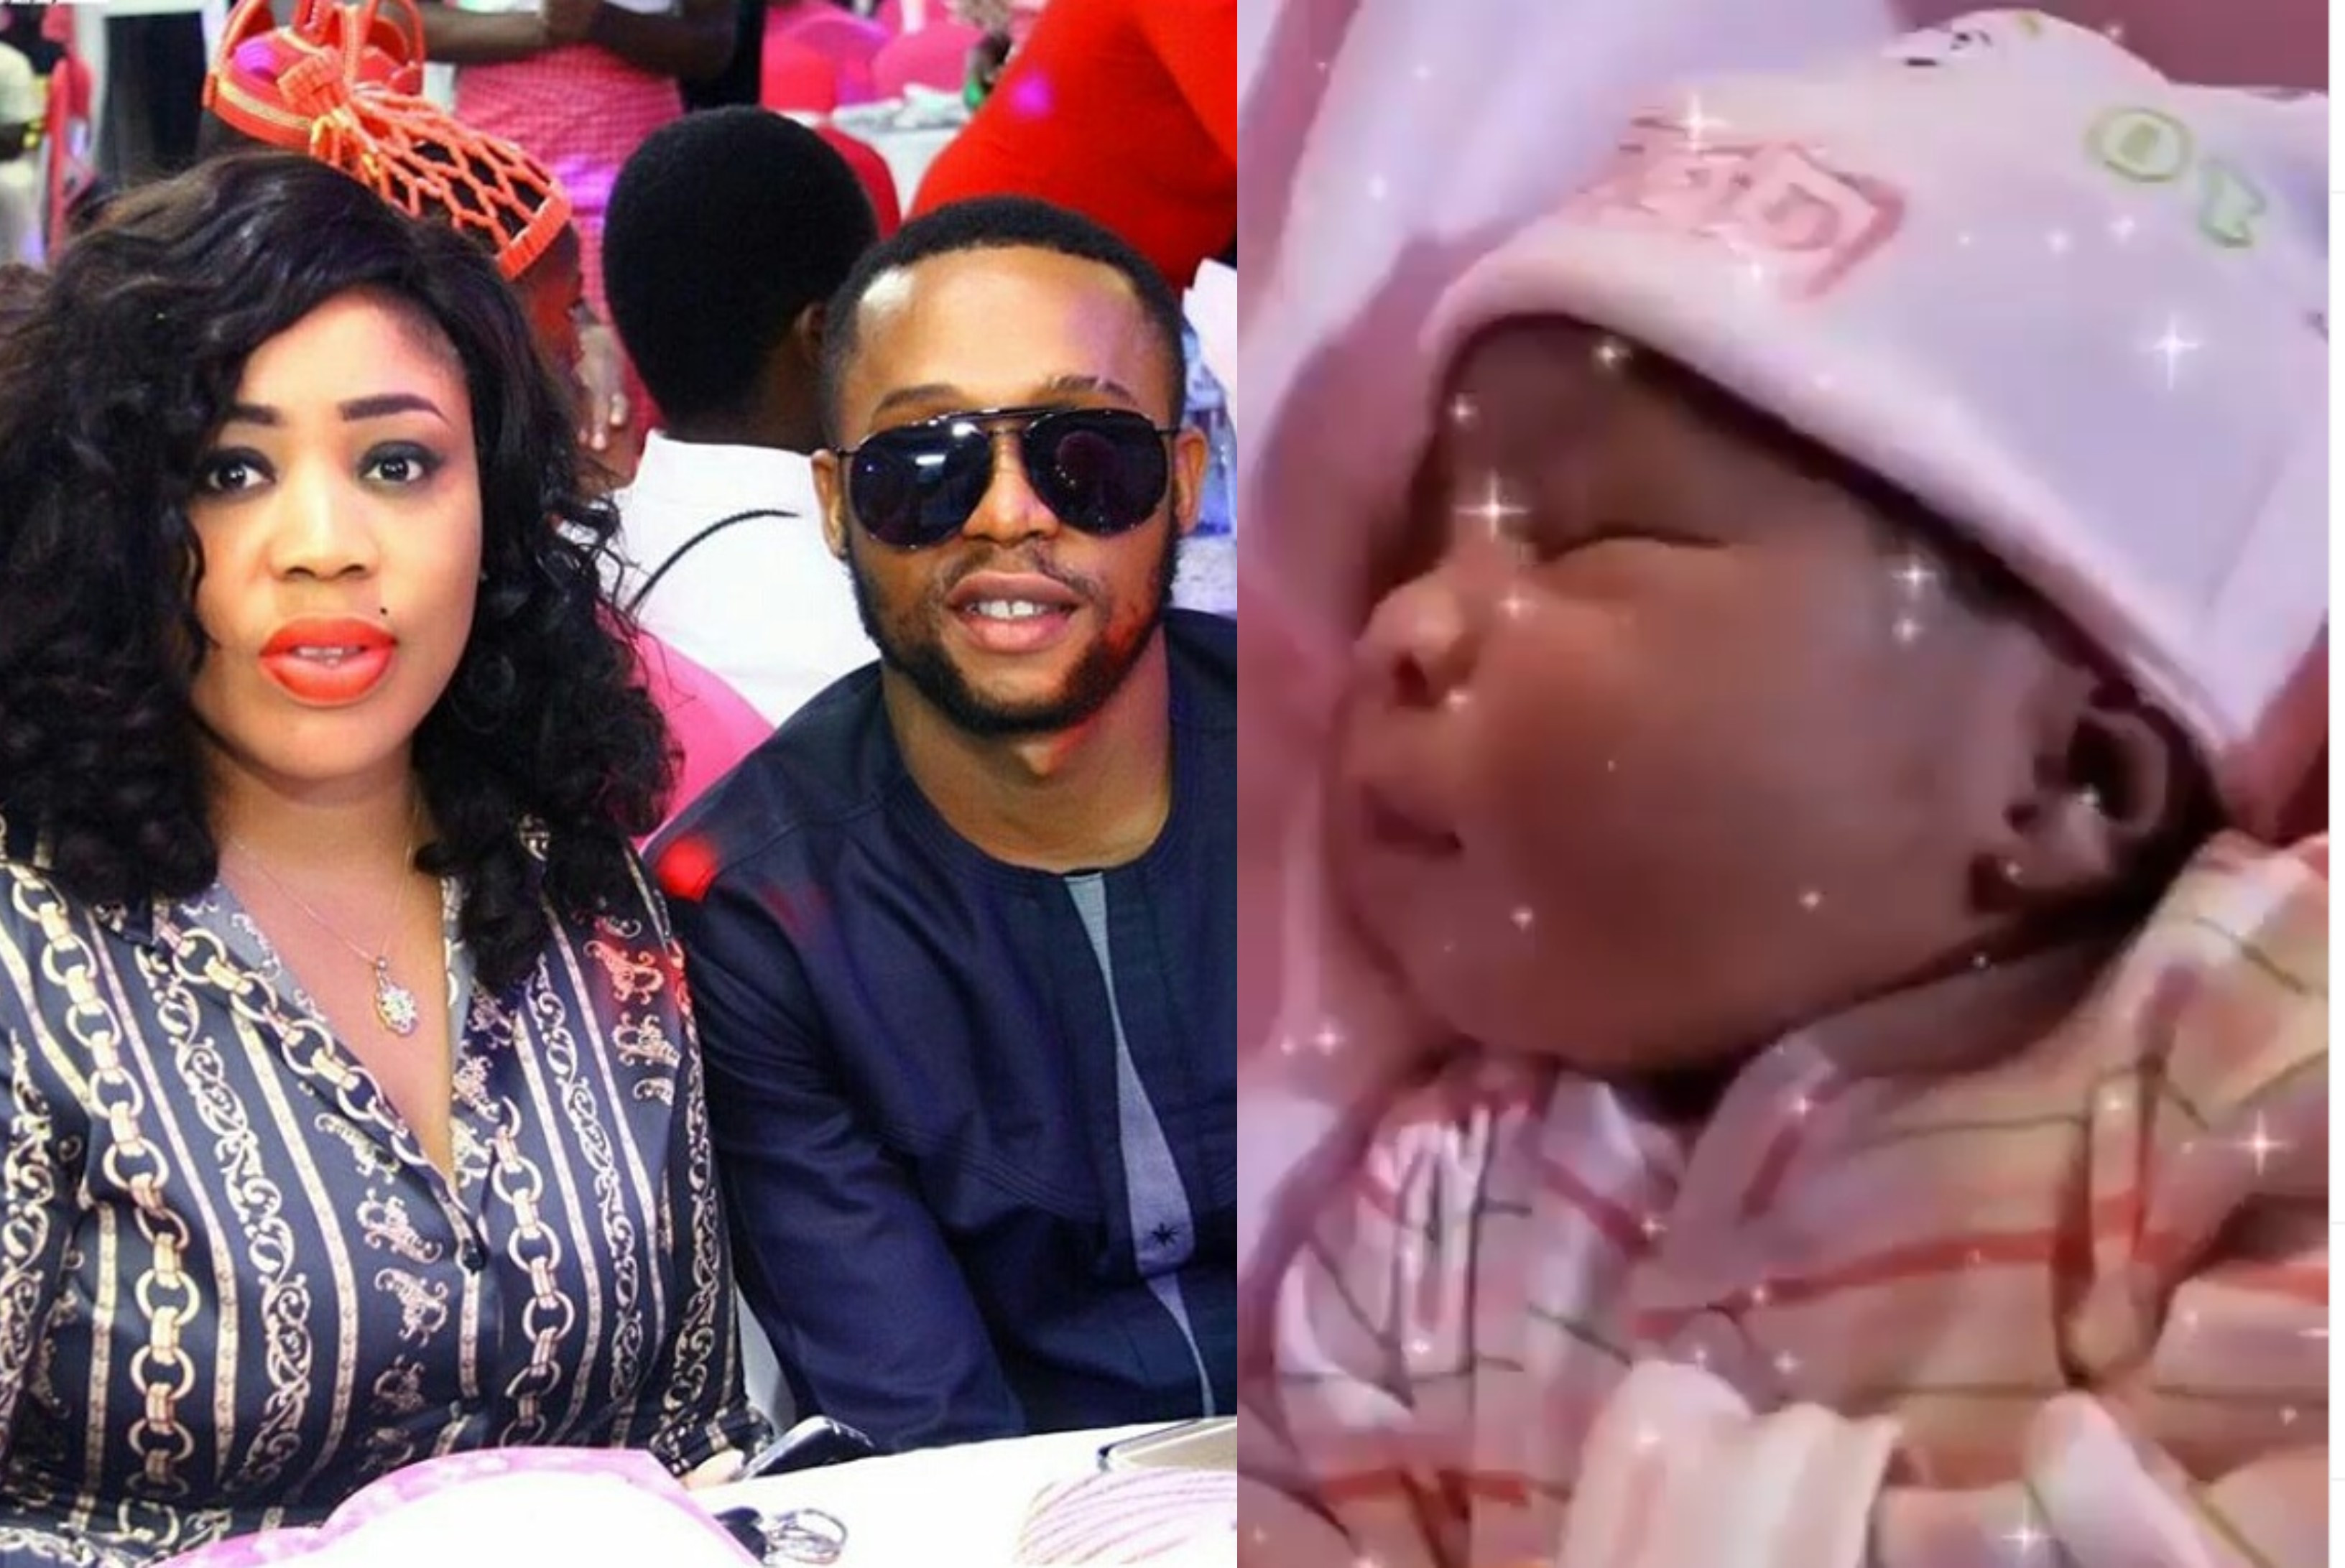 Actor Sunkanmi Omobolanle and his wife welcome a baby